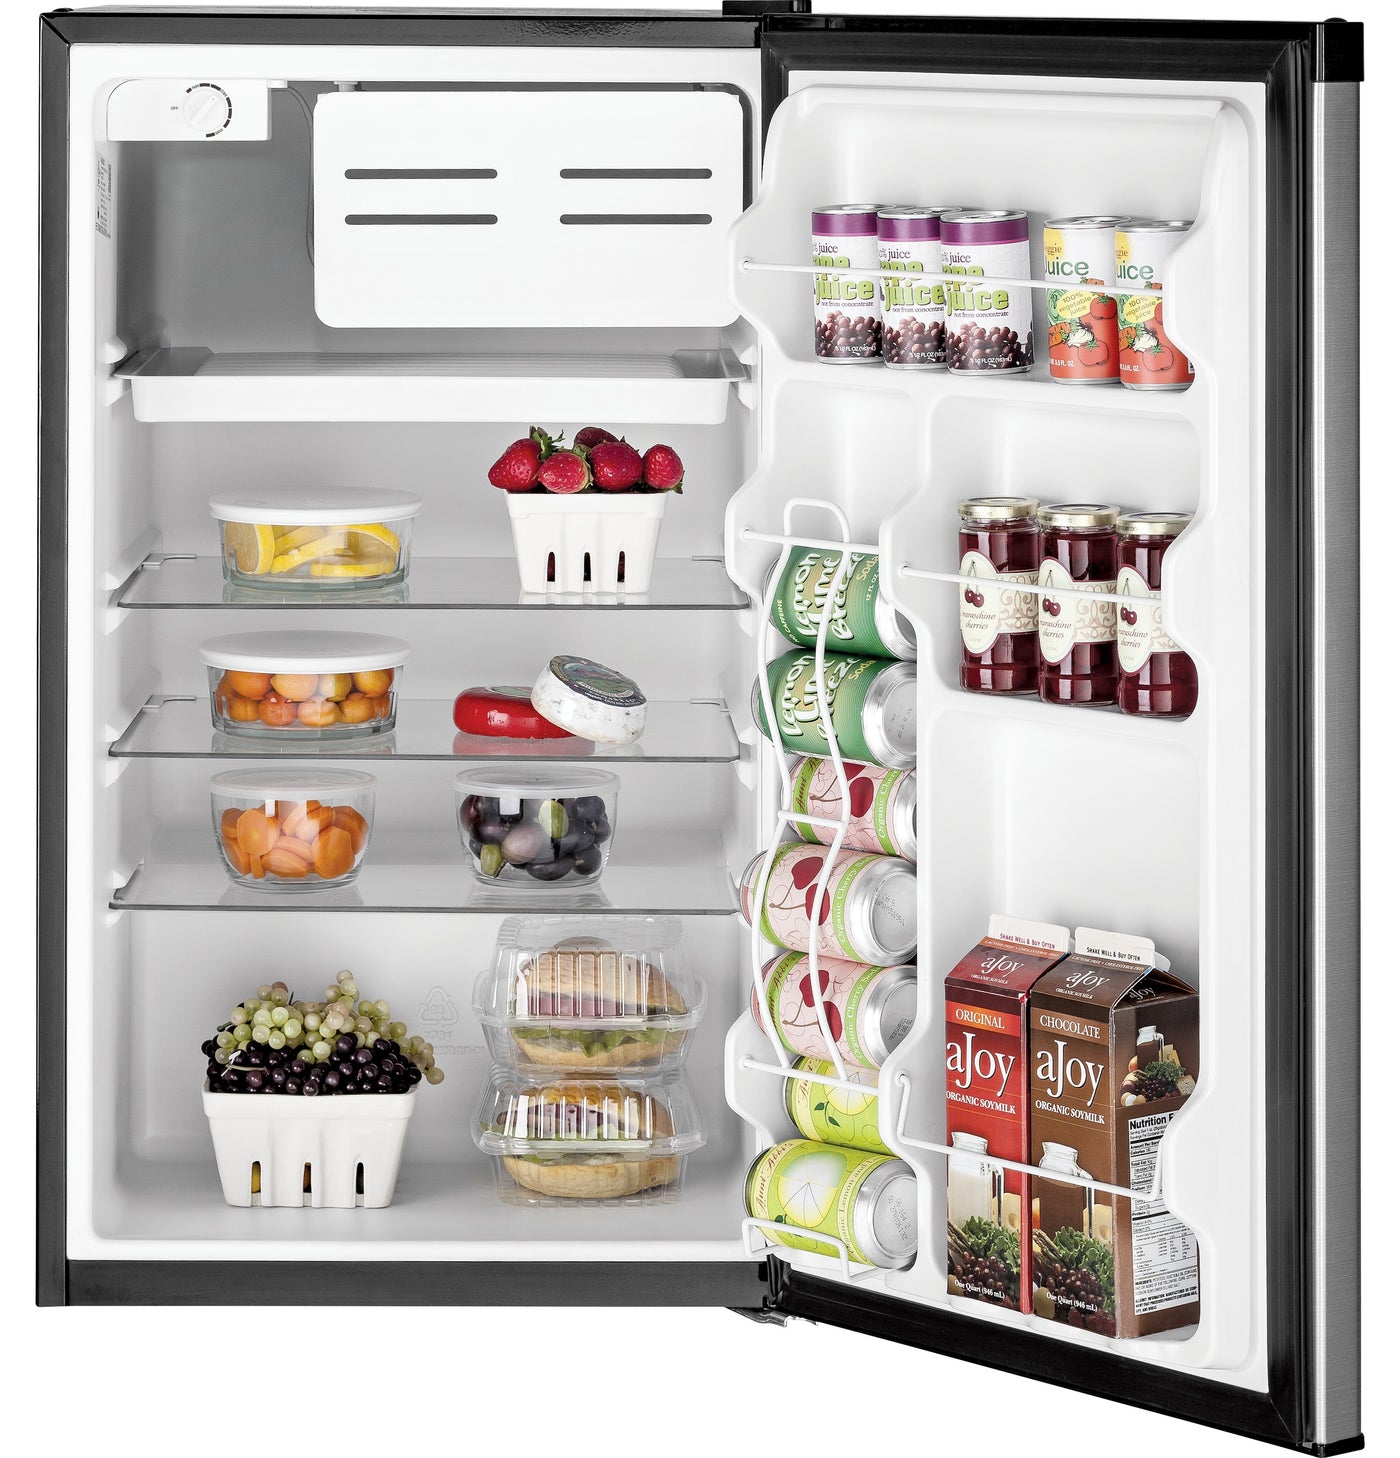 GE Appliances GME04GLKLB Compact Refrigerator with Freezer 4.4 Cu. Ft with 1-Year Warranty